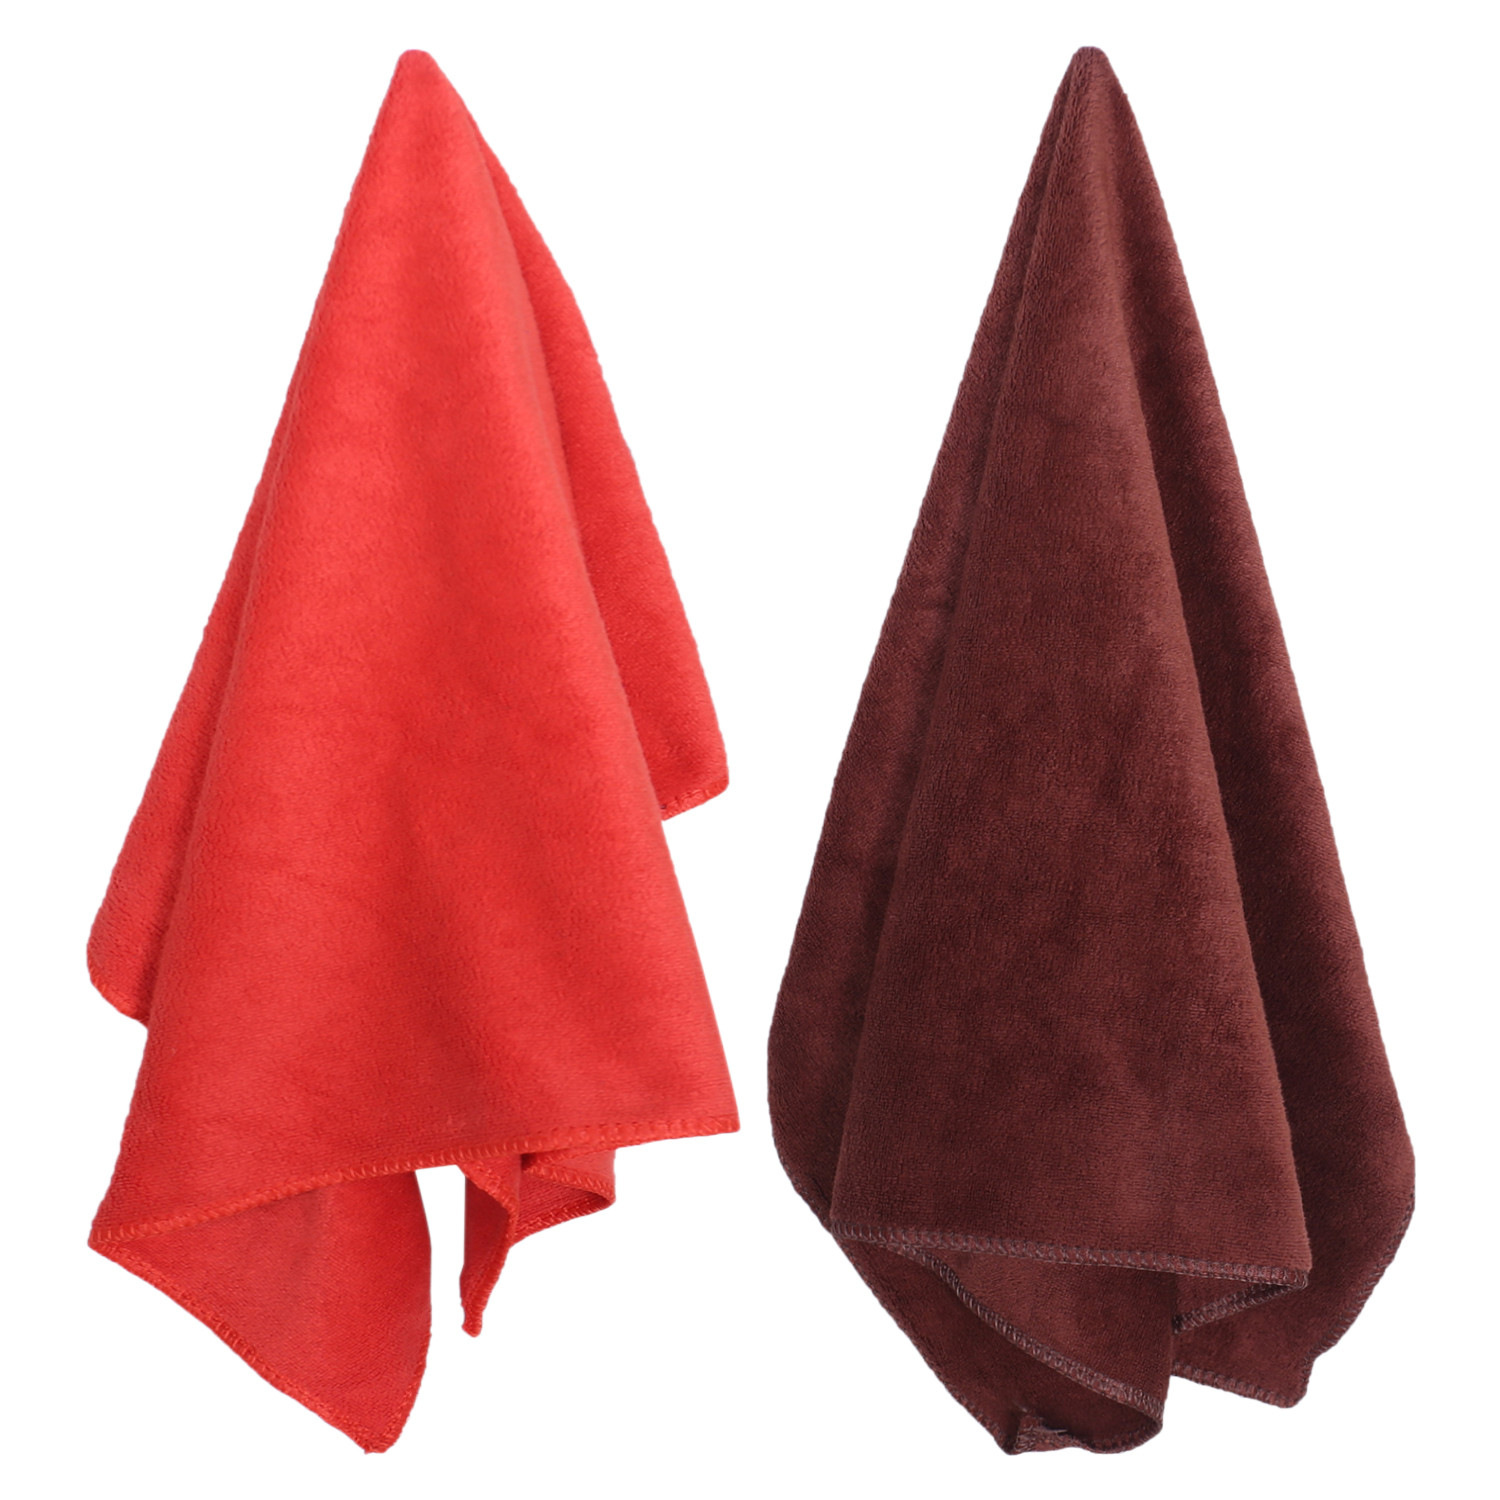 Kuber Industries Cleaning Cloths|Microfiber Highly Absorbent Wash Towels for Kitchen,Car,Window,24 x 16 Inch,Pack of 2 (Red & Brown)